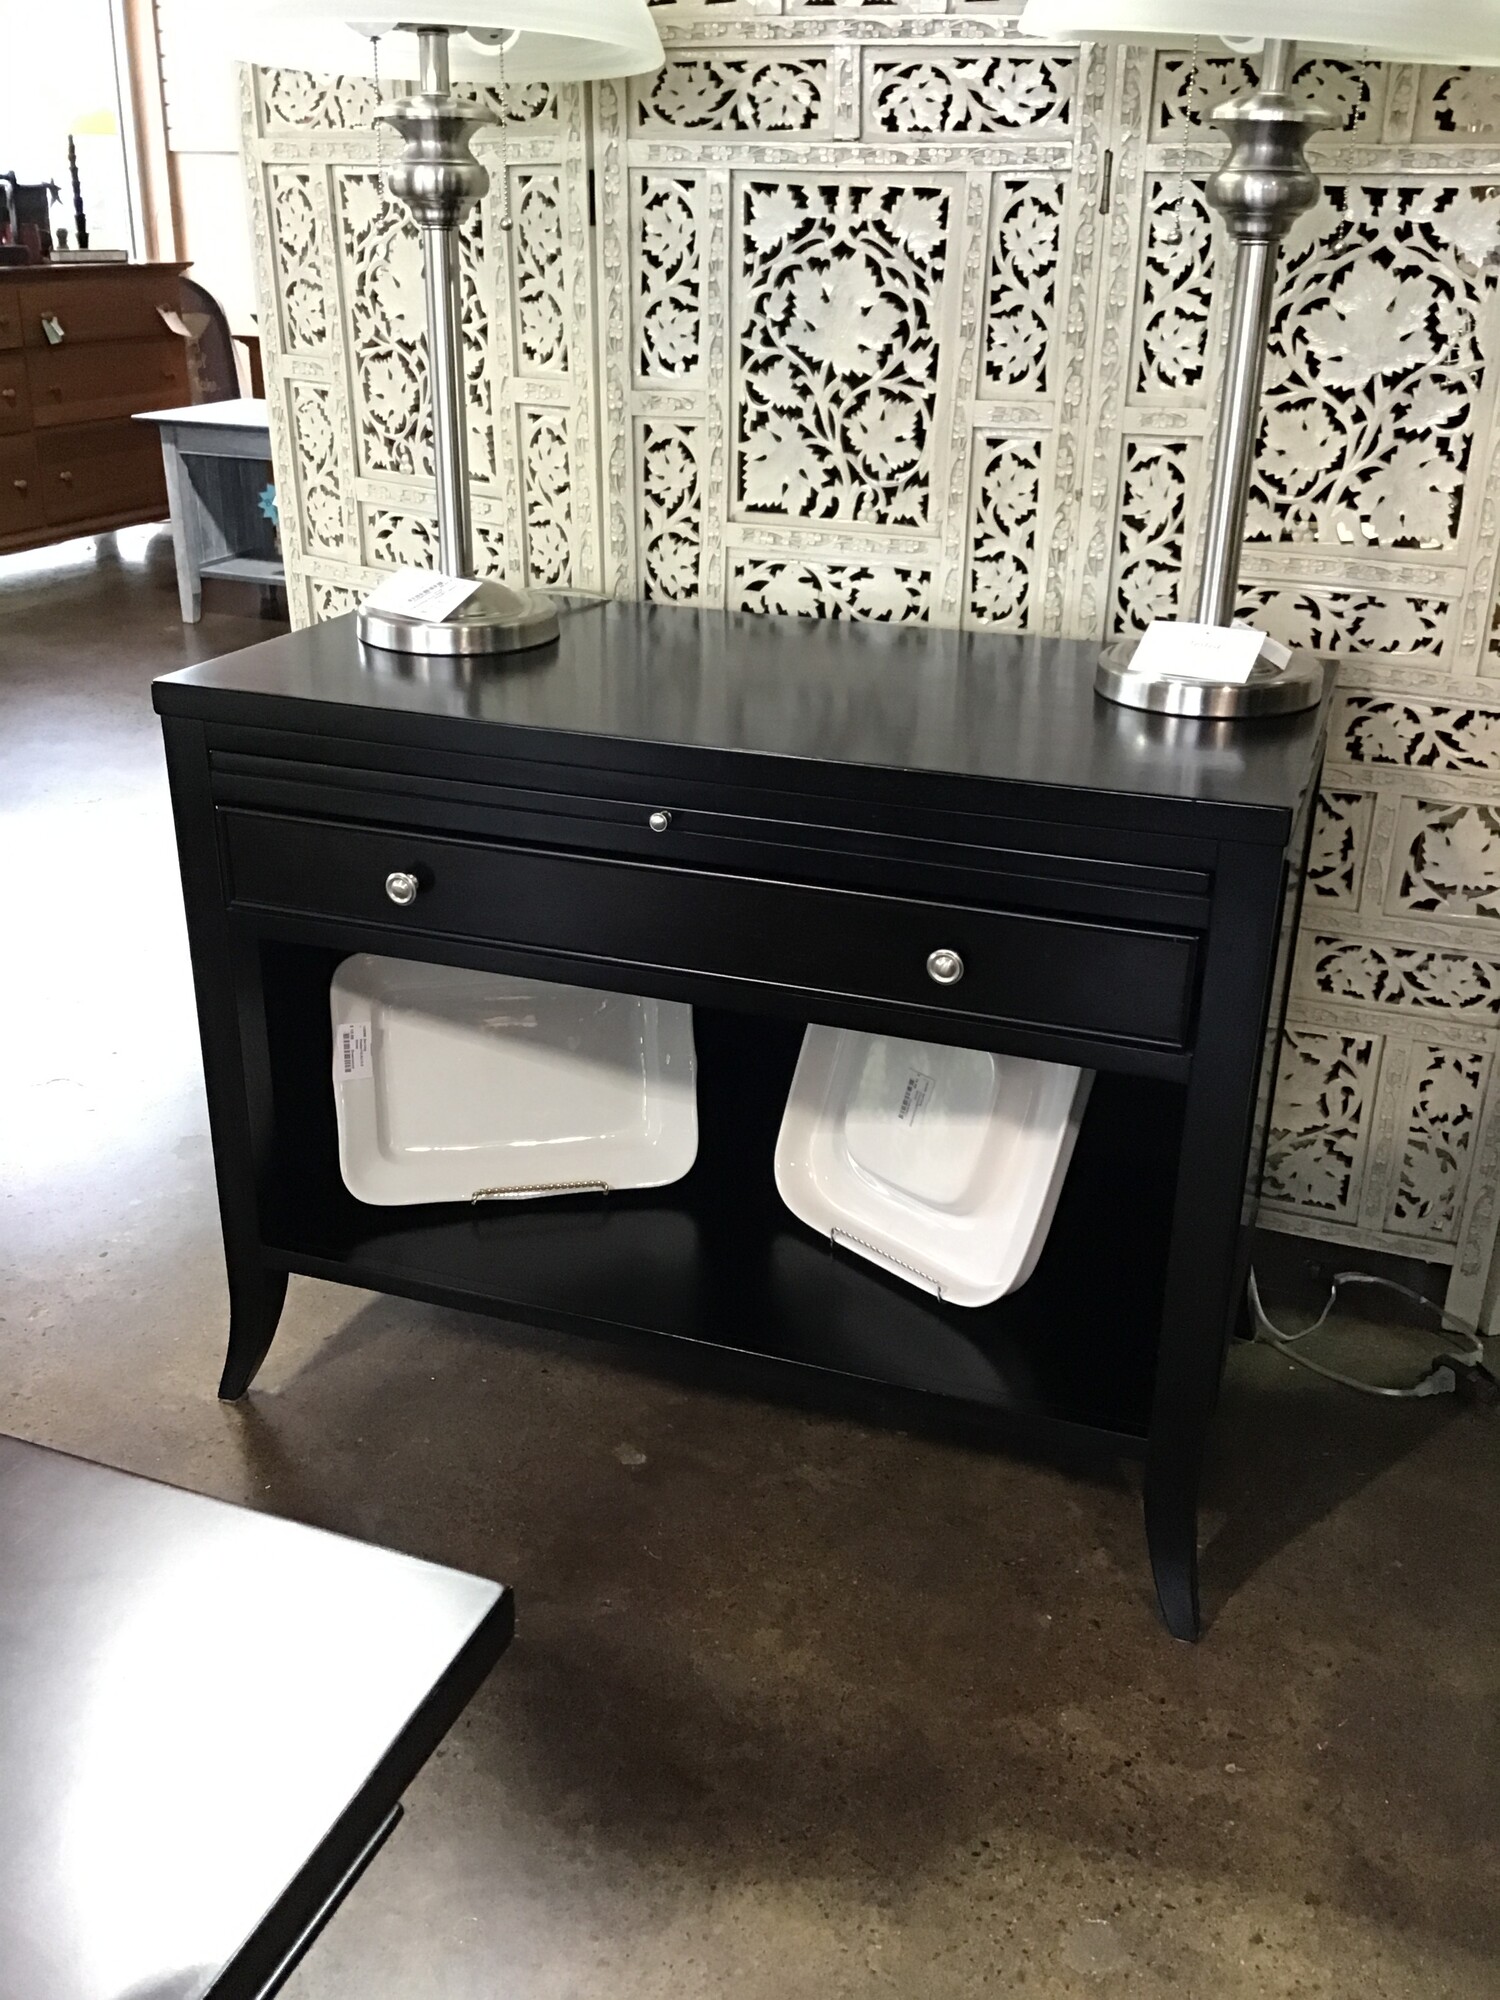 A modern classic, this Arhaus chests understated aesthetic features sleek silhouettes defined by clean lines and deep black  finish. Subtle nickel hardware elevates the style by complementing its black finish with sophisticated detailing.  This piece has a pull out shelf that can be used to write on or as a spot by your bed to put a drink.  There is a drawer and a deep space below to hold so many different things!

Dimensions:  38 x 19.5 x 29.5